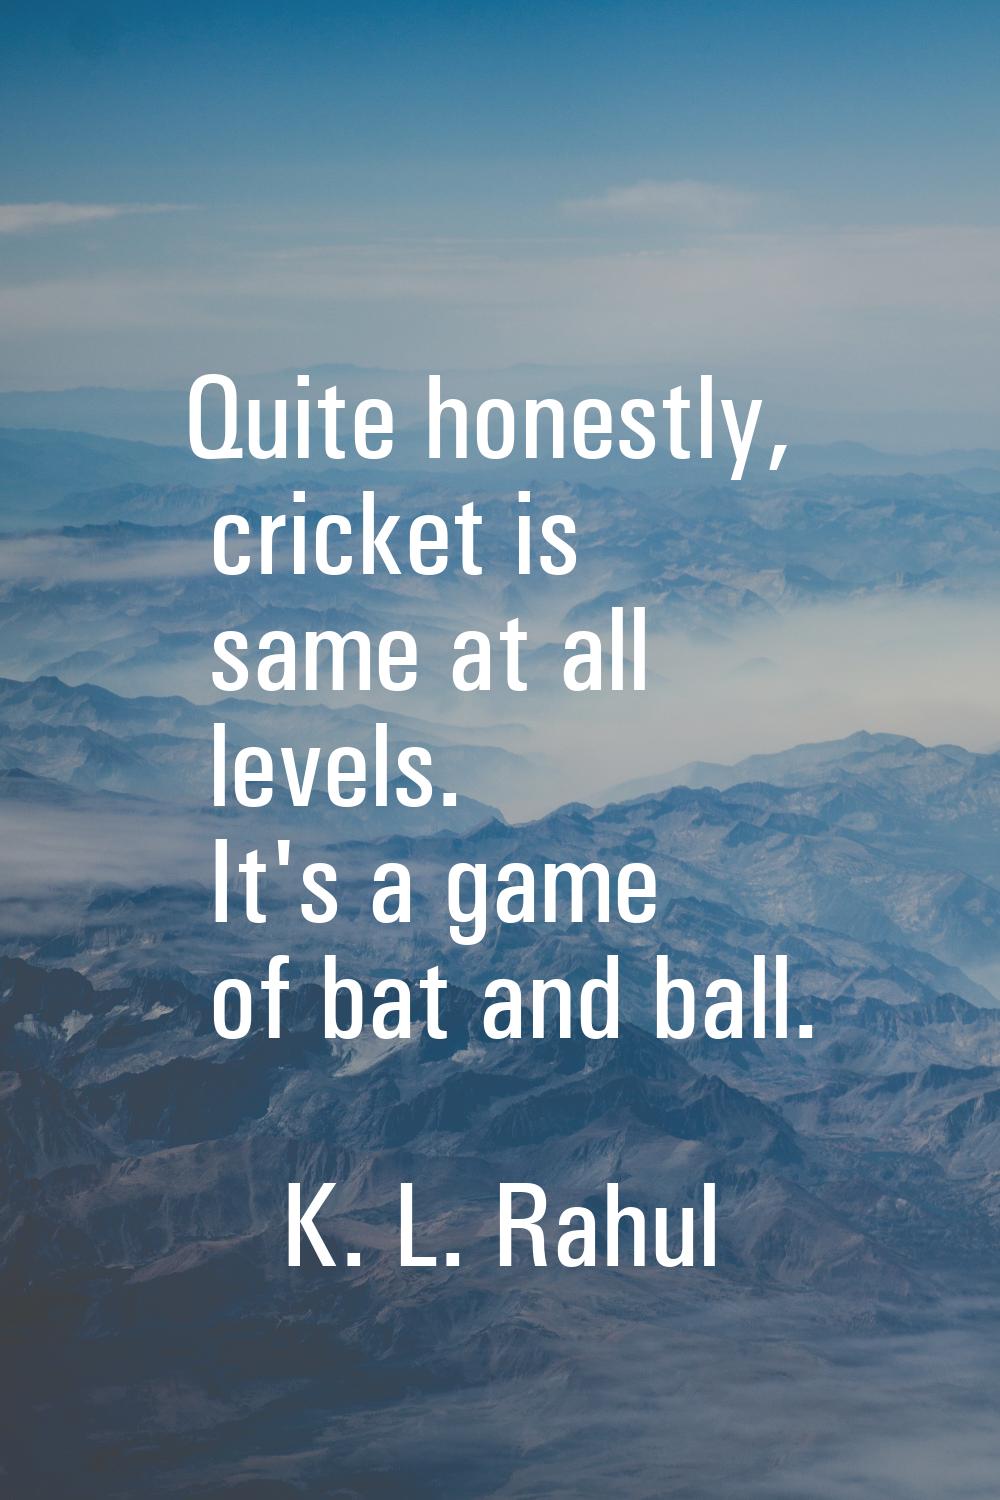 Quite honestly, cricket is same at all levels. It's a game of bat and ball.